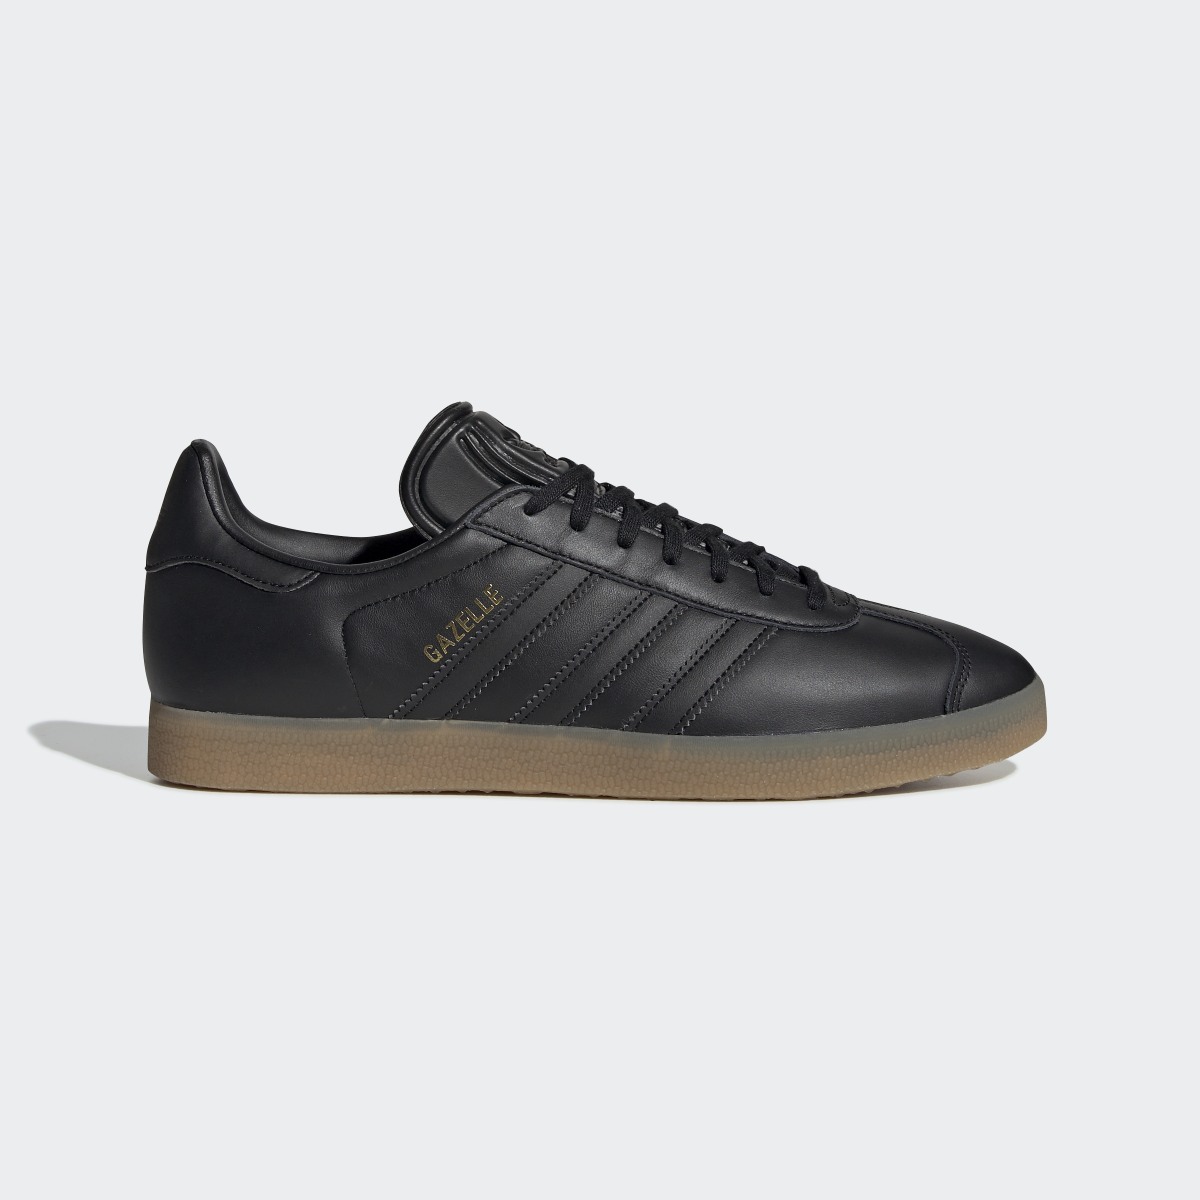 adidas outlet uk